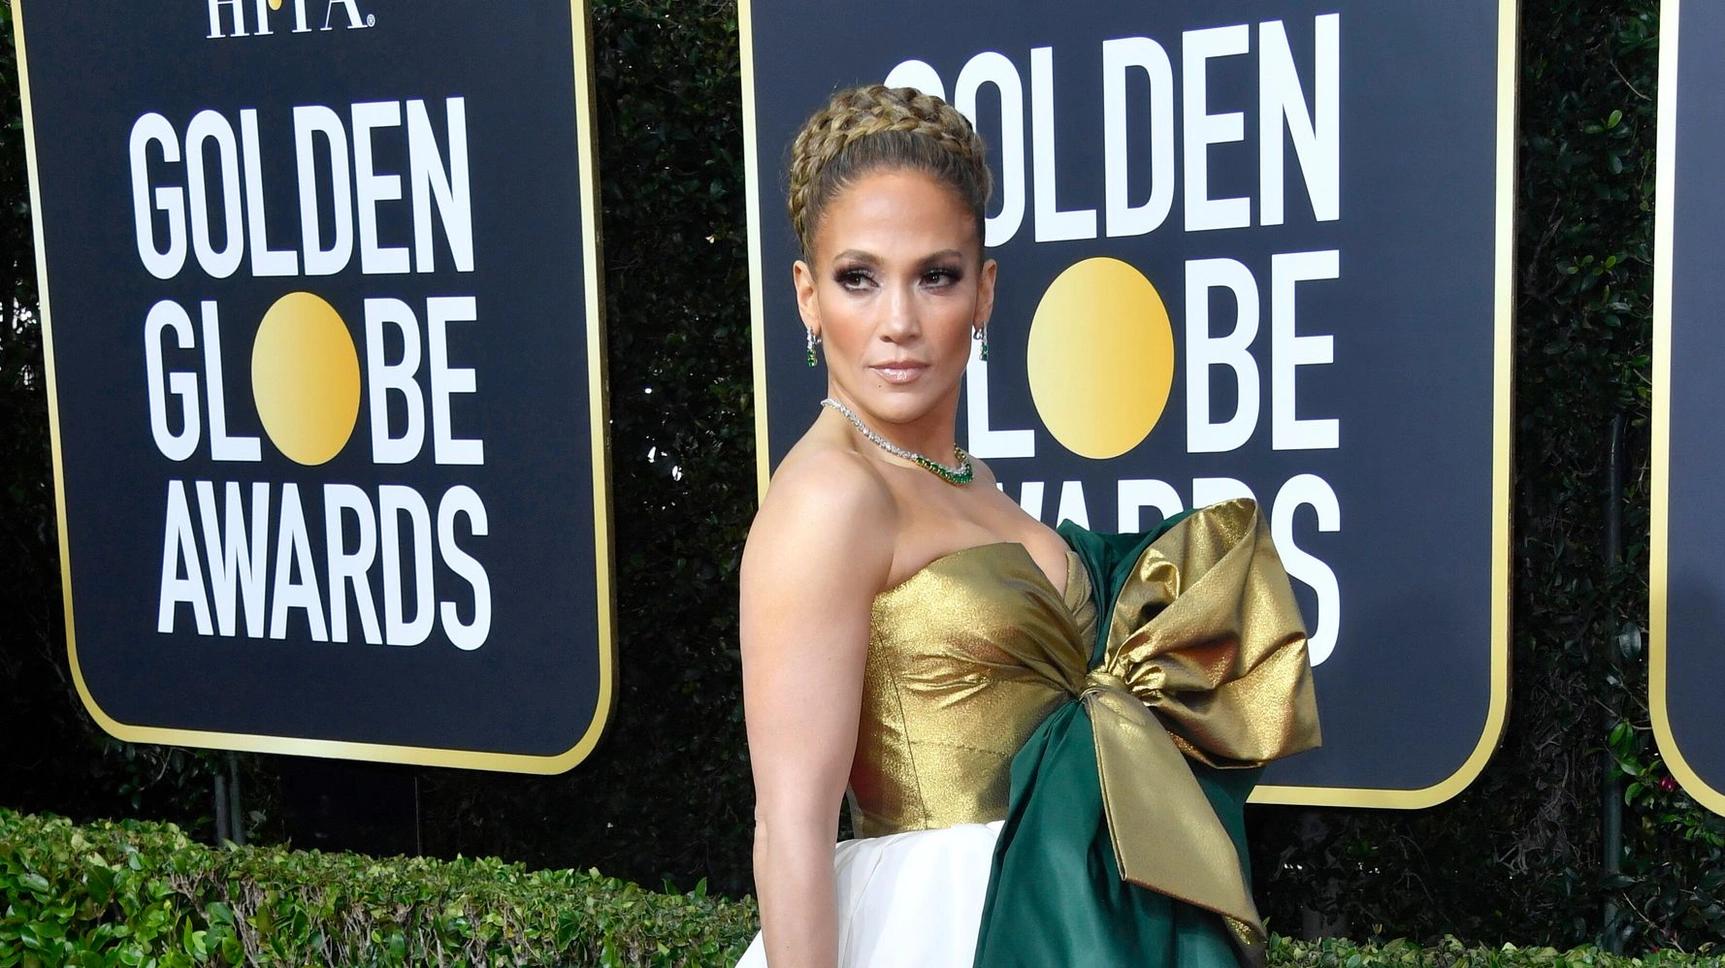 Golden Globe Style Spotlight: The Most Iconic Golden Gowns in Golden Globe History